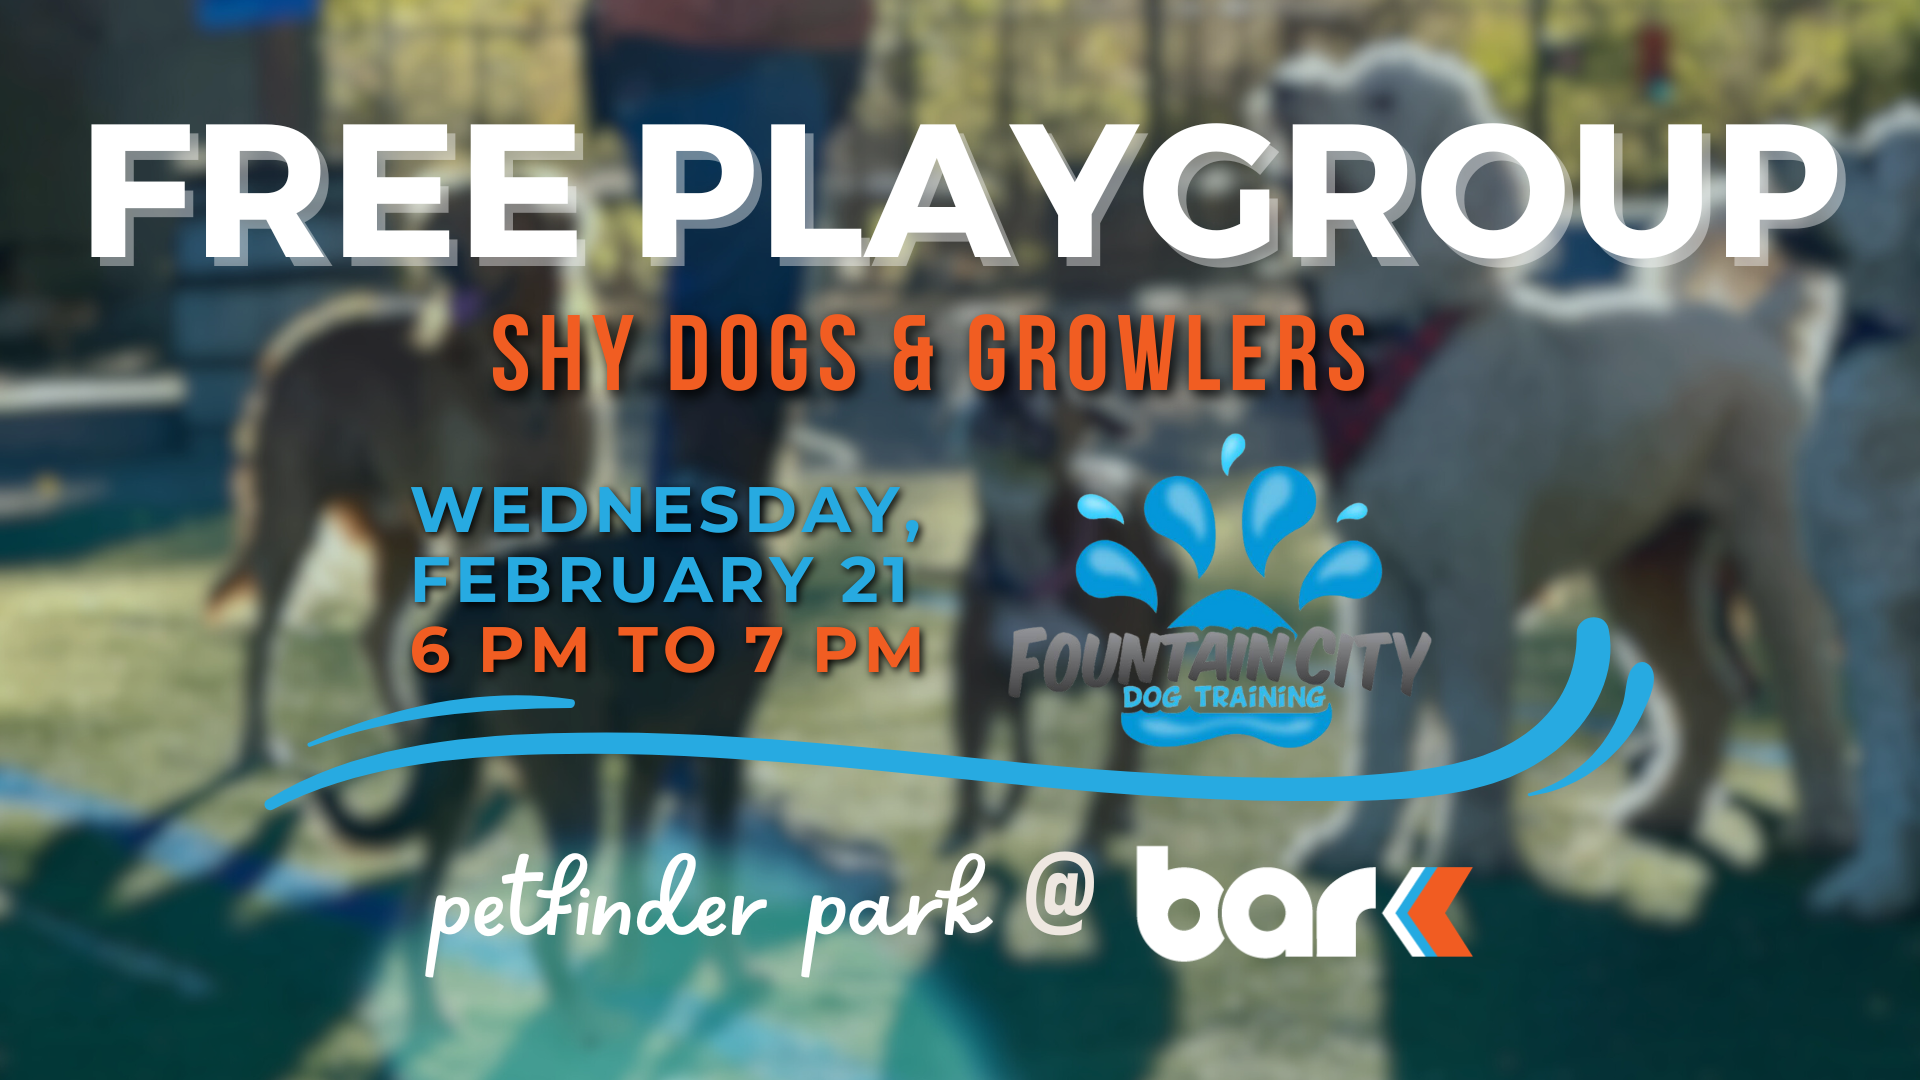 Free Play group for shy dogs and growlers. Wednesday Feb 21st from 6 to 7 pm hosted by Fountain city dog training. Petfinder park at Bar K.